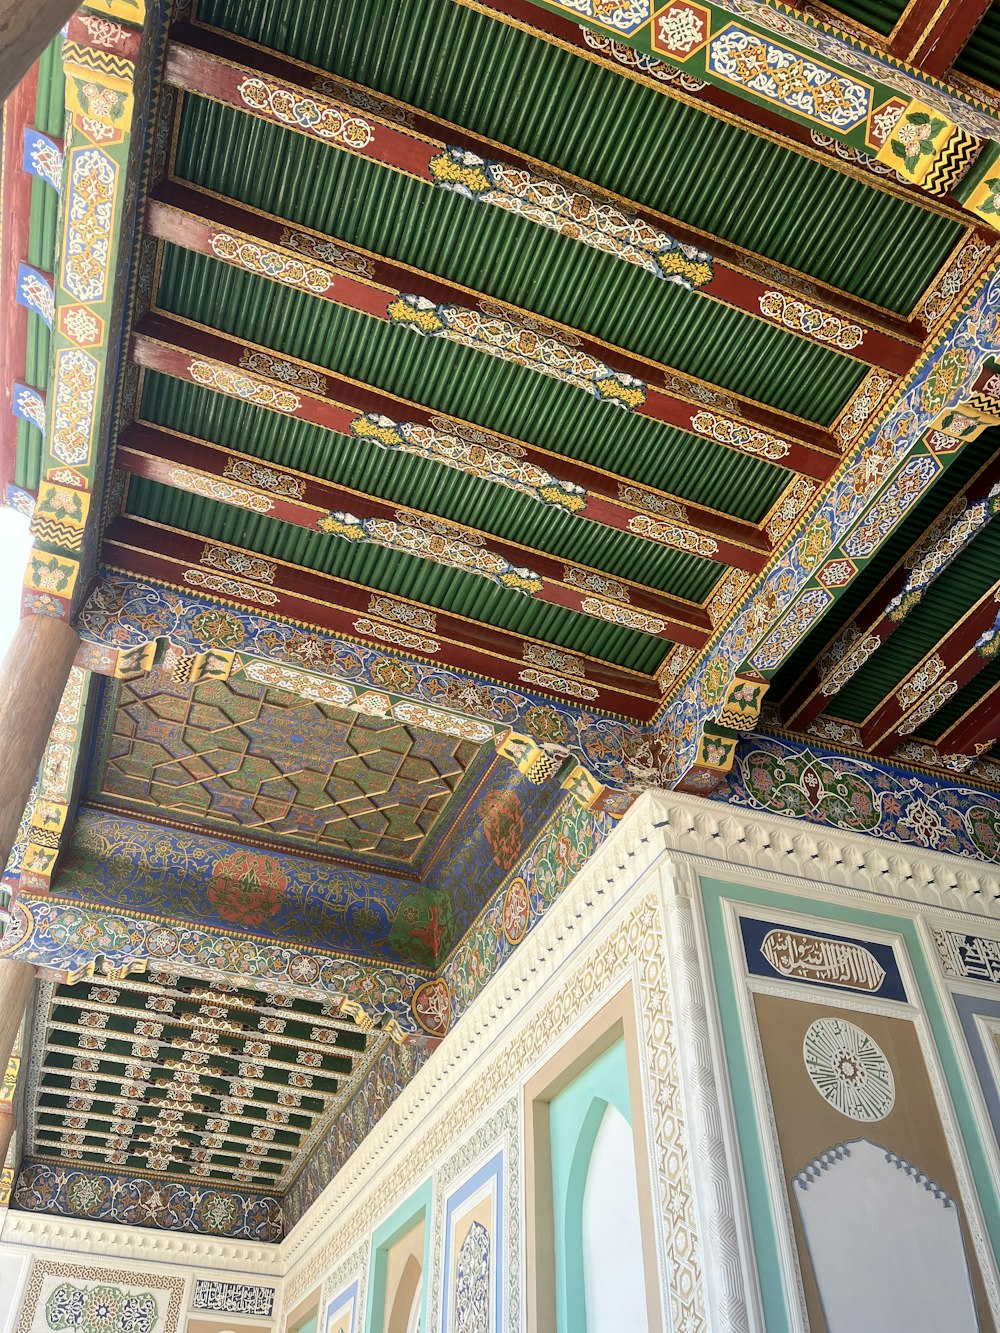 the ceiling of a building with colorful designs on it